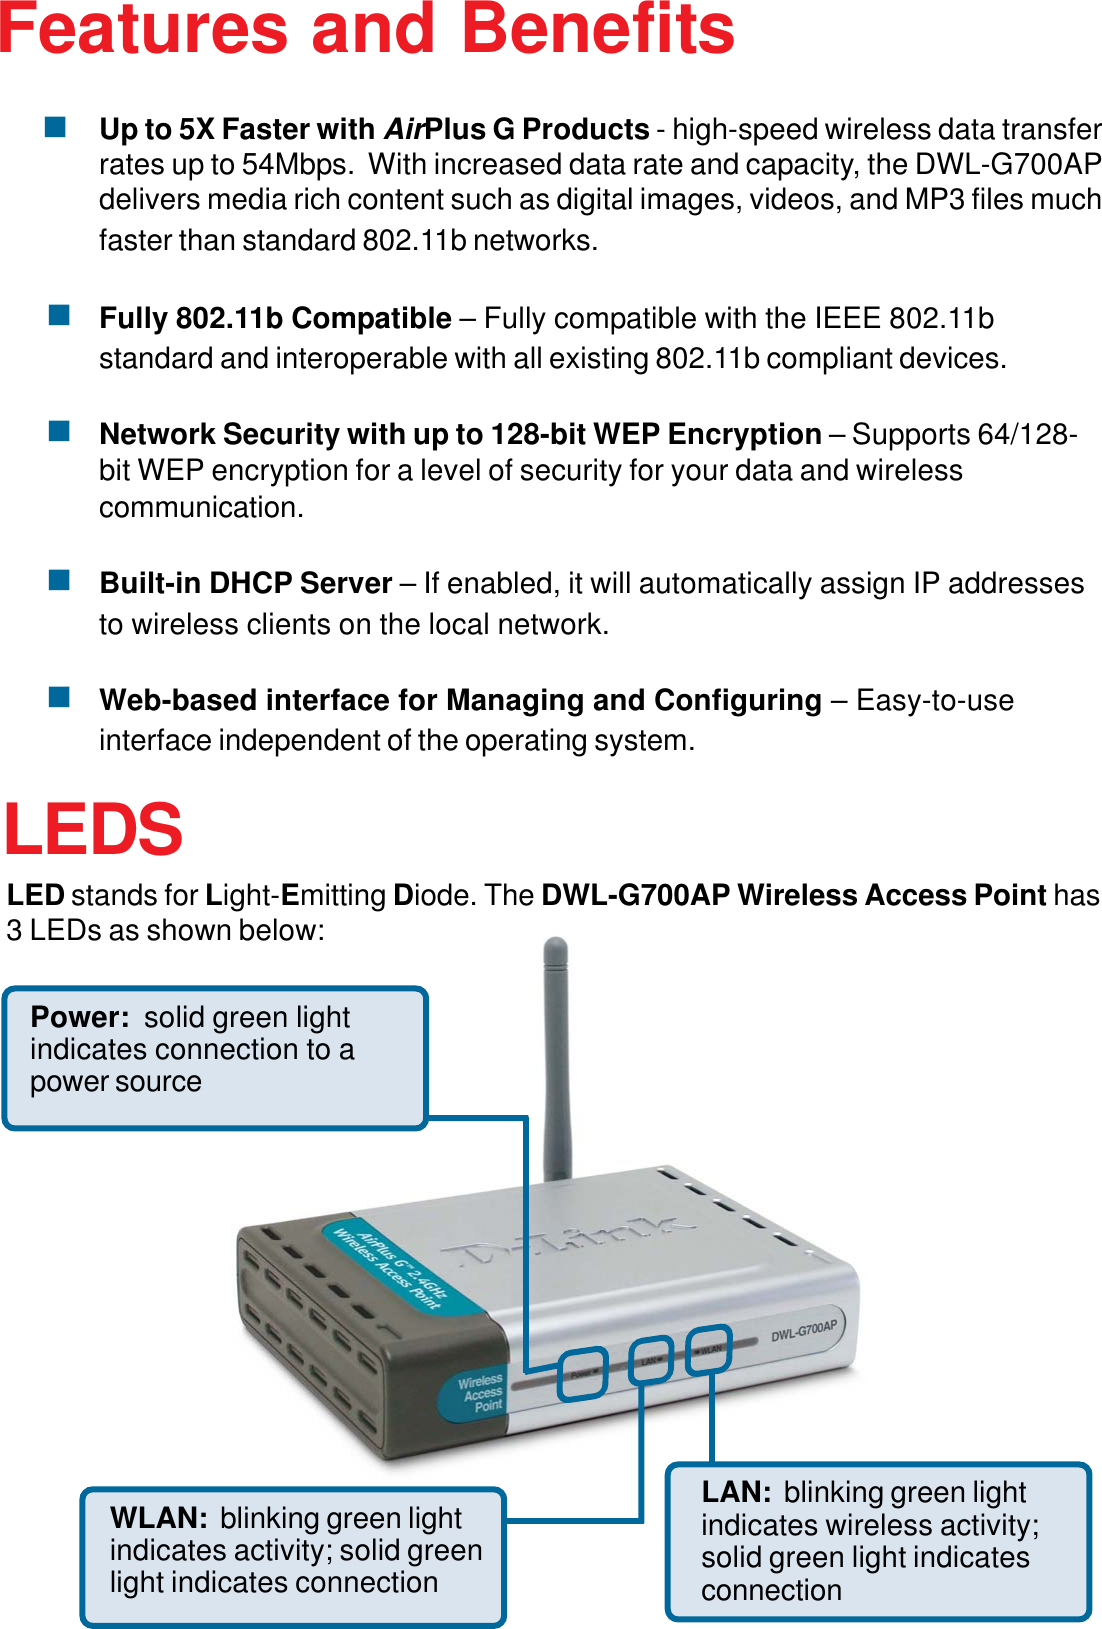 5Up to 5X Faster with AirPlus G Products - high-speed wireless data transferrates up to 54Mbps.  With increased data rate and capacity, the DWL-G700APdelivers media rich content such as digital images, videos, and MP3 files muchfaster than standard 802.11b networks.Fully 802.11b Compatible – Fully compatible with the IEEE 802.11bstandard and interoperable with all existing 802.11b compliant devices.Network Security with up to 128-bit WEP Encryption – Supports 64/128-bit WEP encryption for a level of security for your data and wirelesscommunication.Built-in DHCP Server – If enabled, it will automatically assign IP addressesto wireless clients on the local network.Web-based interface for Managing and Configuring – Easy-to-useinterface independent of the operating system.Features and BenefitsLEDSLED stands for Light-Emitting Diode. The DWL-G700AP Wireless Access Point has3 LEDs as shown below:LAN:  blinking green lightindicates wireless activity;solid green light indicatesconnectionWLAN:  blinking green lightindicates activity; solid greenlight indicates connectionPower:  solid green lightindicates connection to apower source